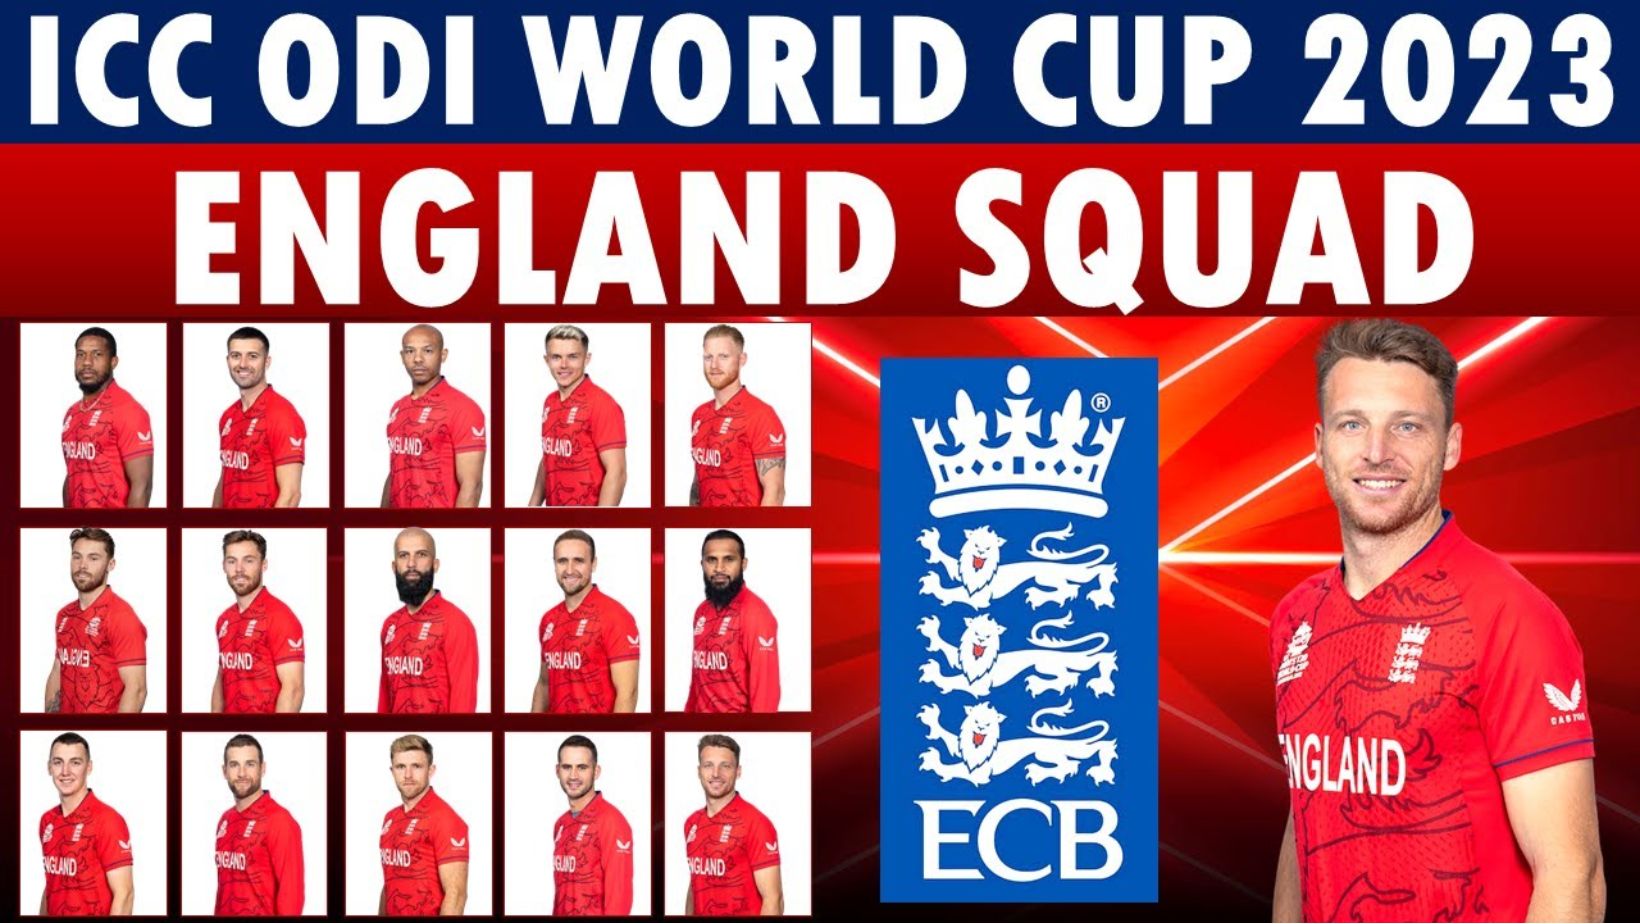 A Rising Star Earns His Place in England’s World Cup Squad